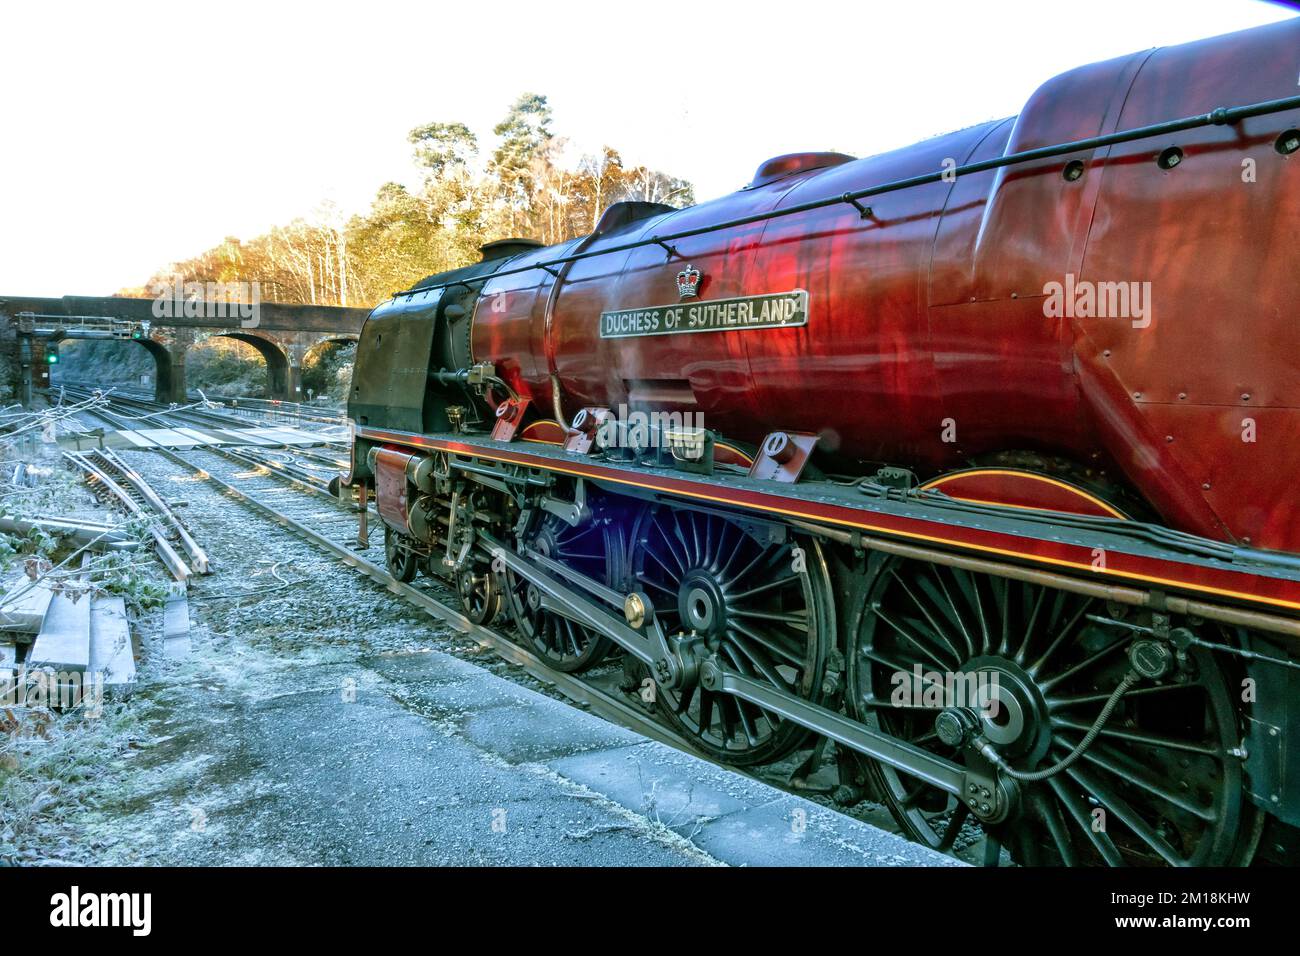 Railway Touring Company's Bath And Bristol Christmas Market express. Pulled by 4633 Duchess of Sutherland LMS steam locomotive Stock Photo